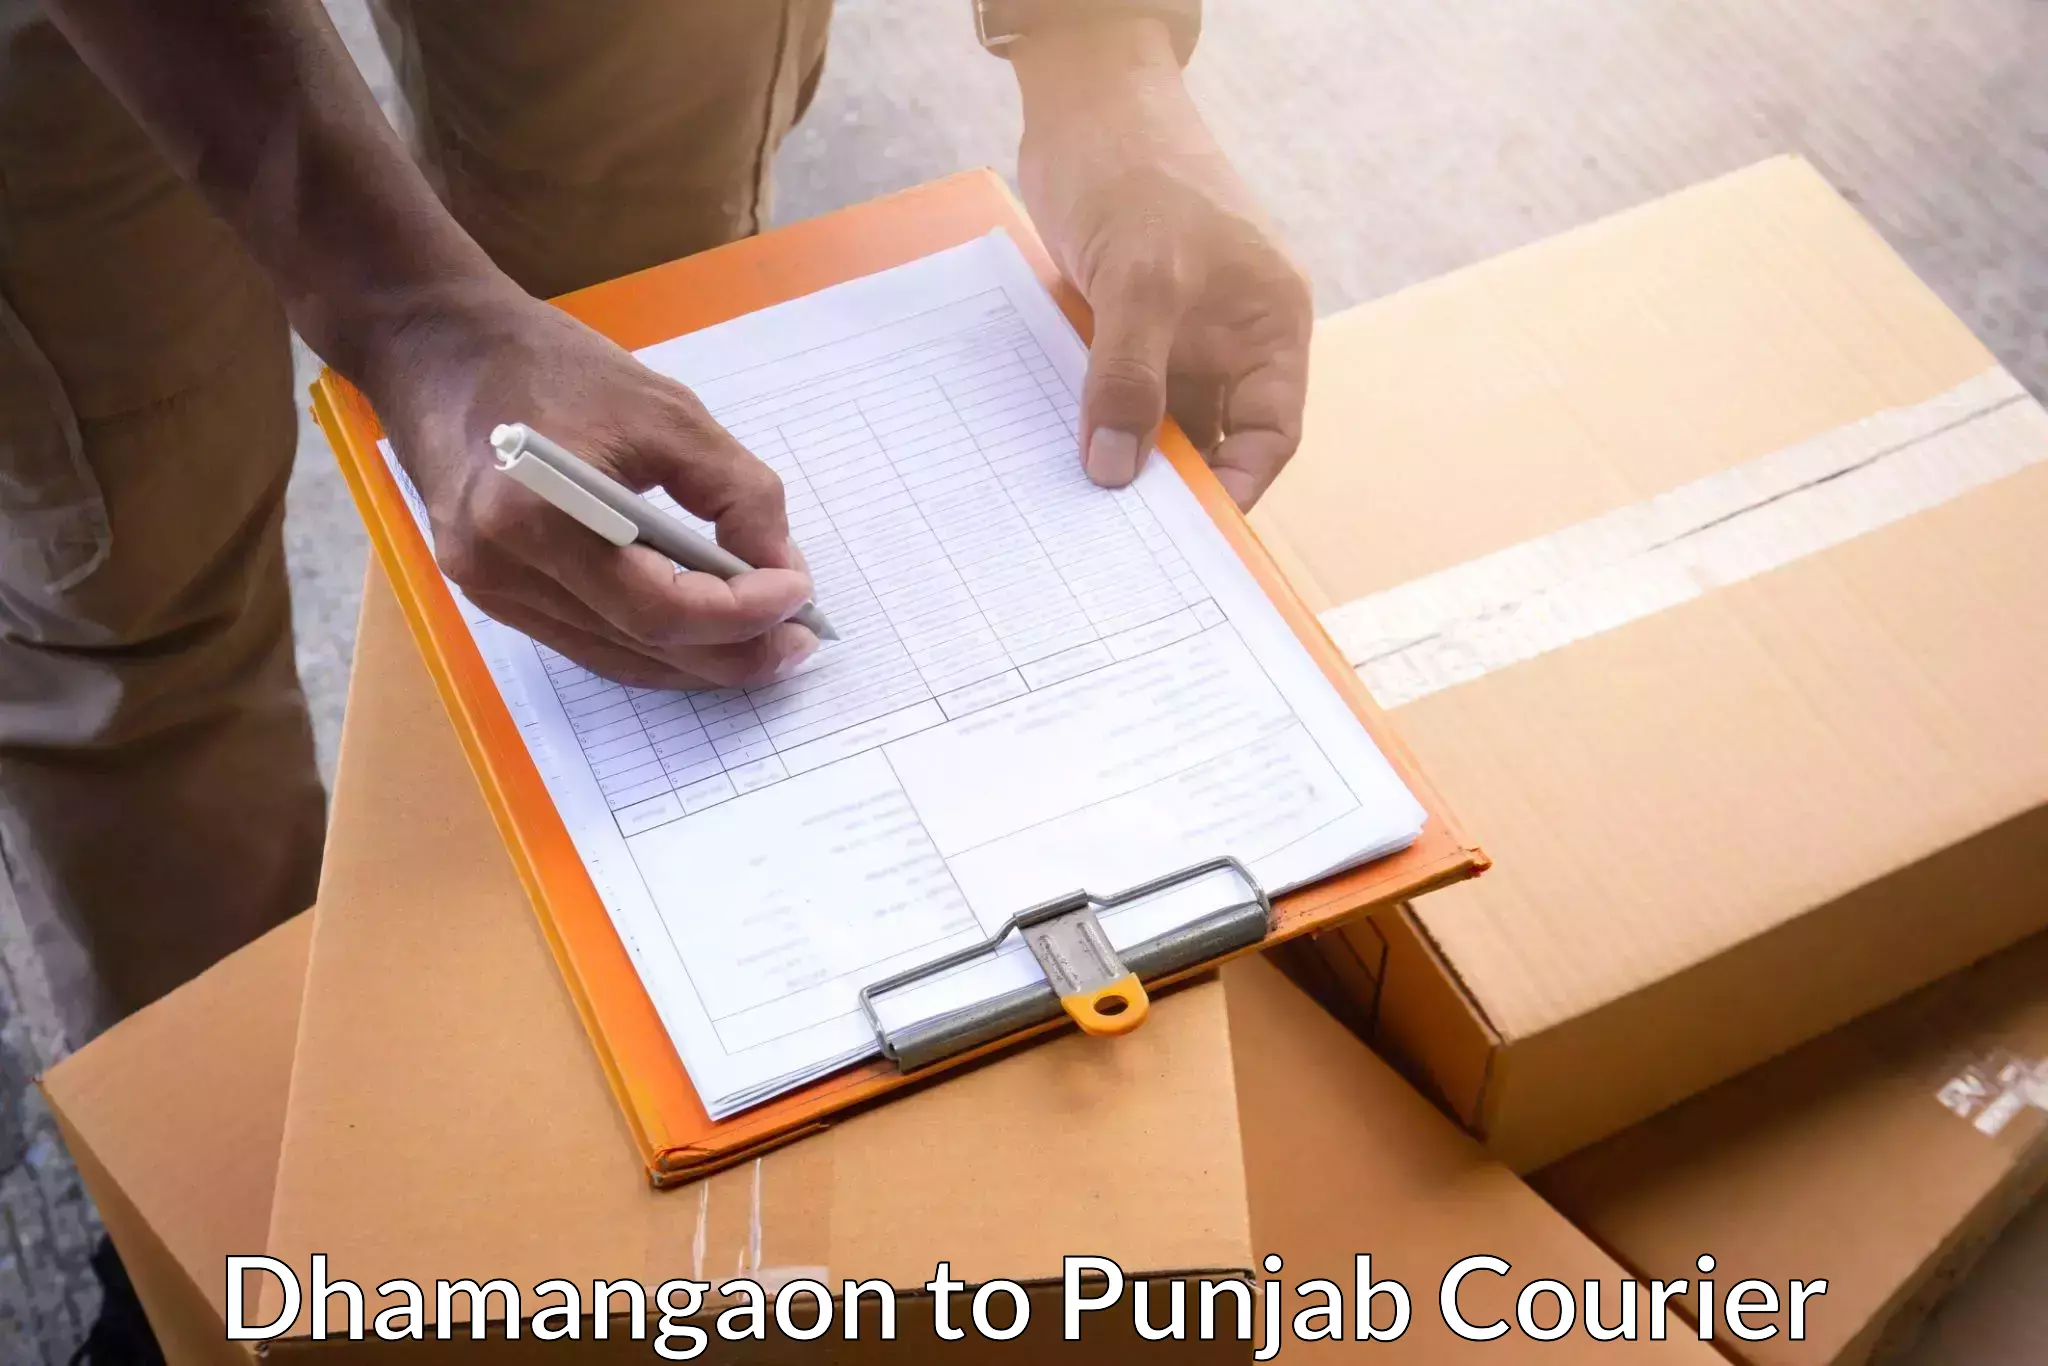 Custom courier packaging Dhamangaon to Pathankot